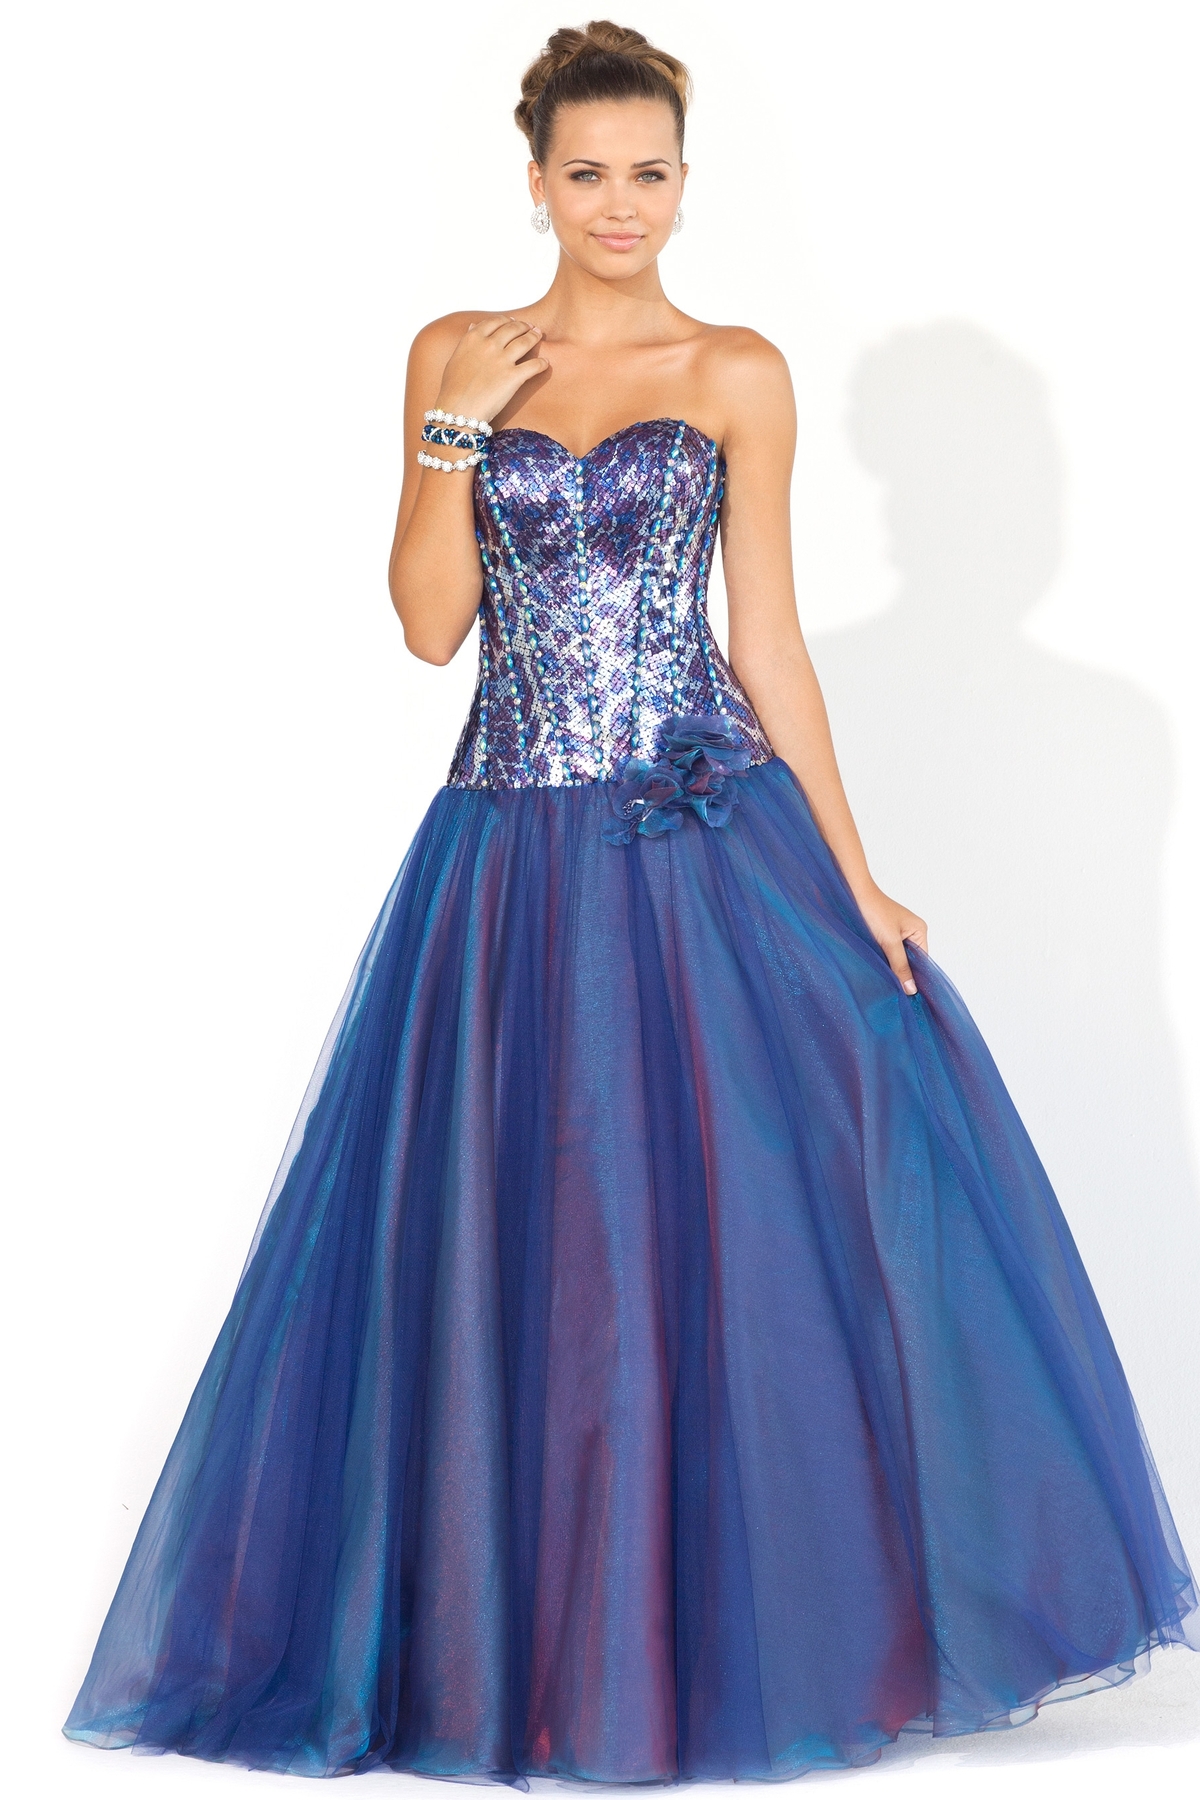 Ball Gown Length - Fashion Outlet Review